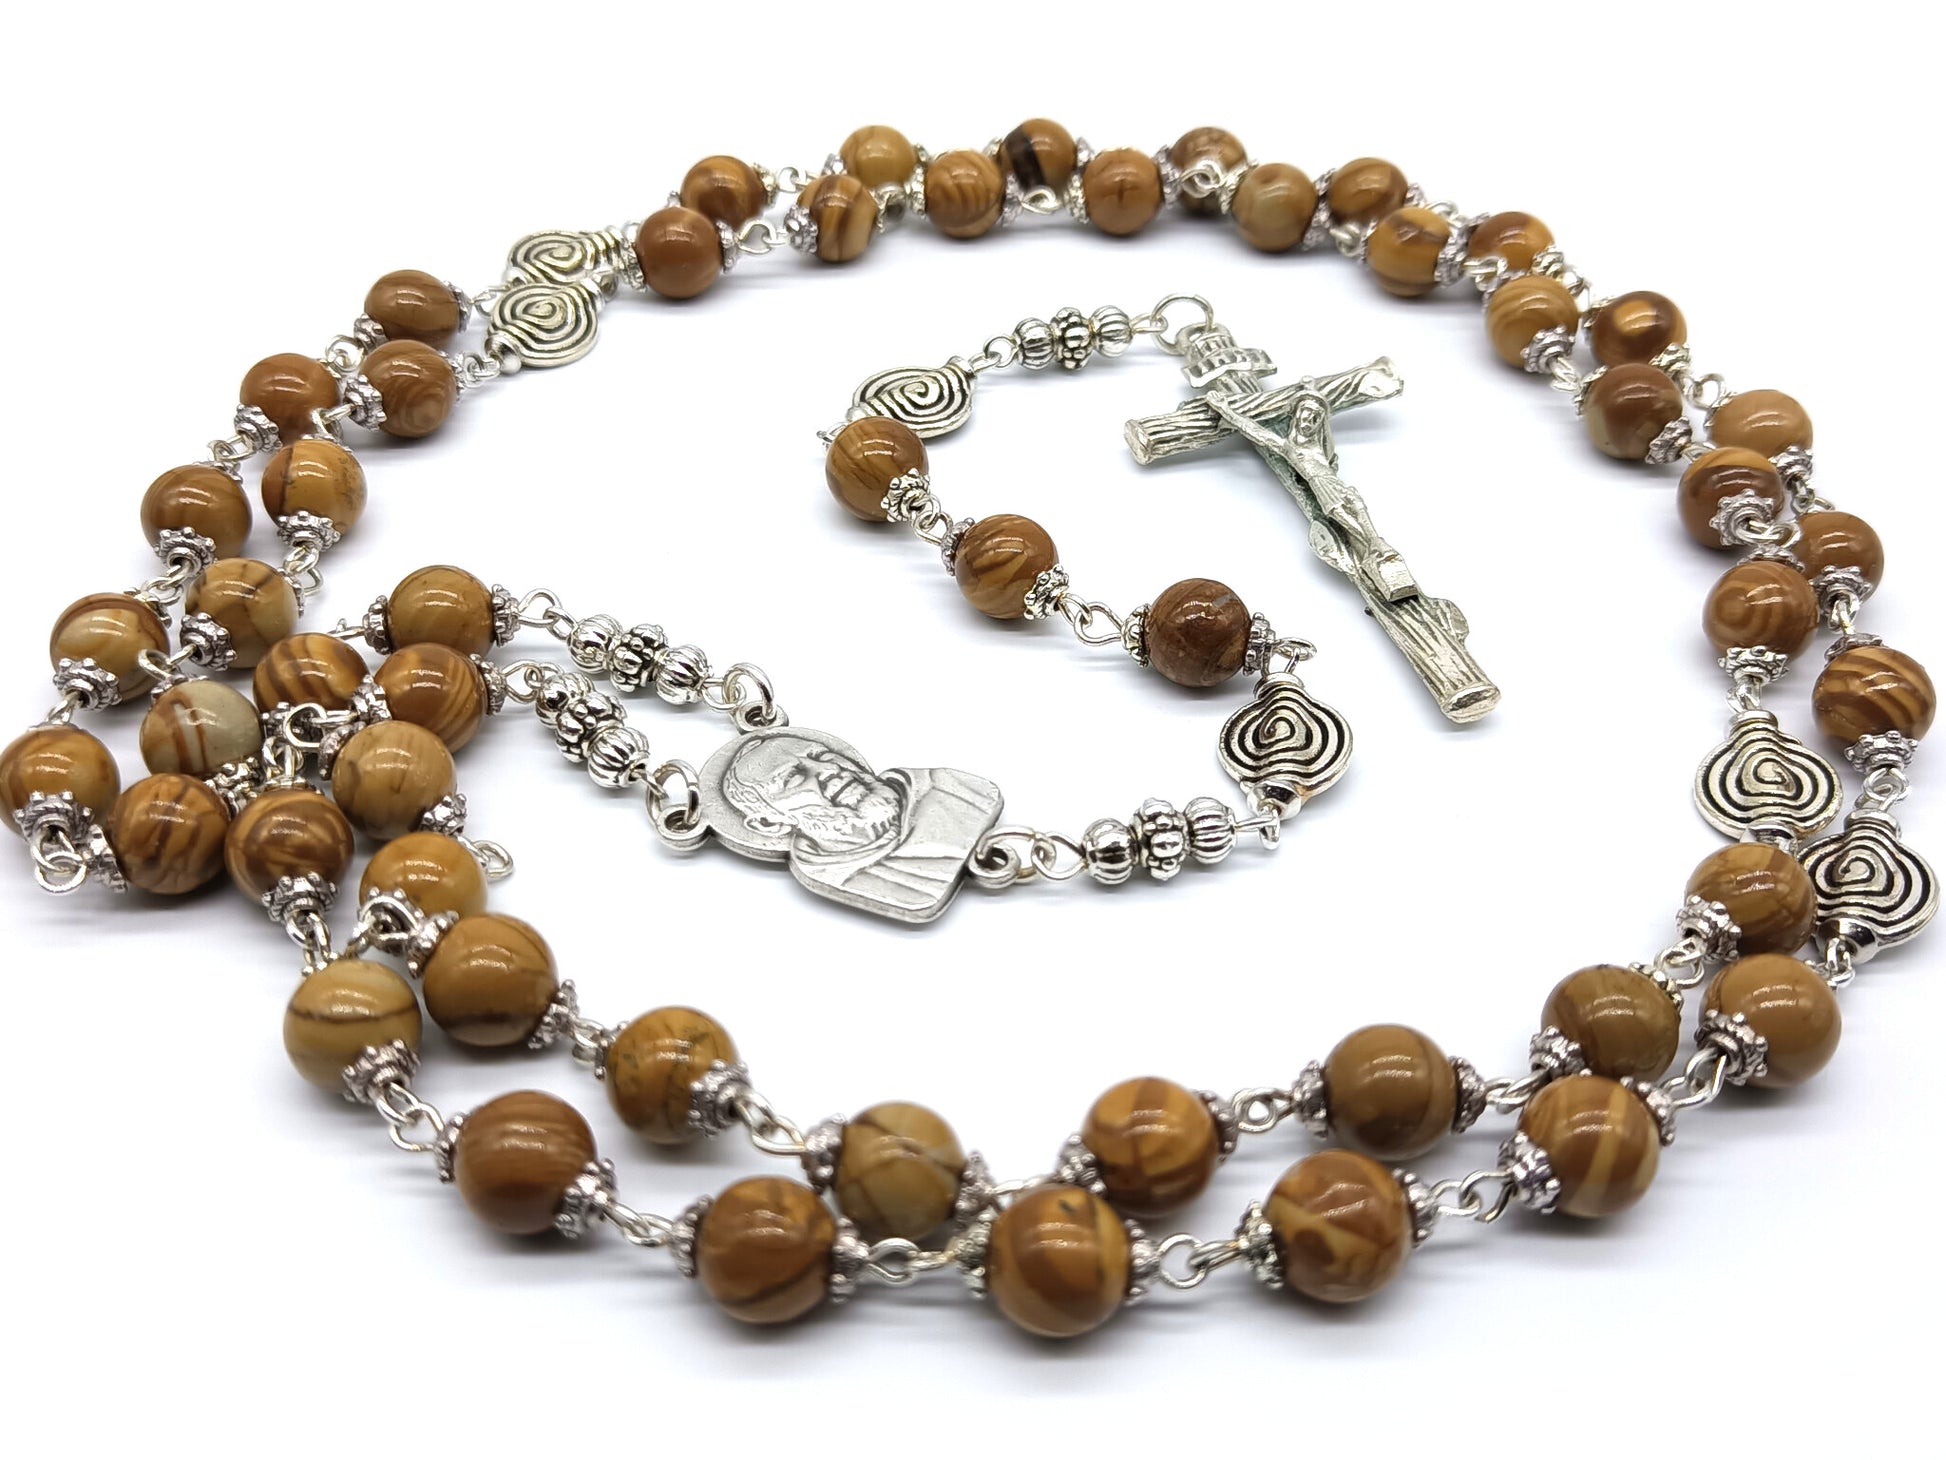 Saint Padre Pio unique rosary beads with gemstone beads, silver pater beads, crucifix and centre medal.